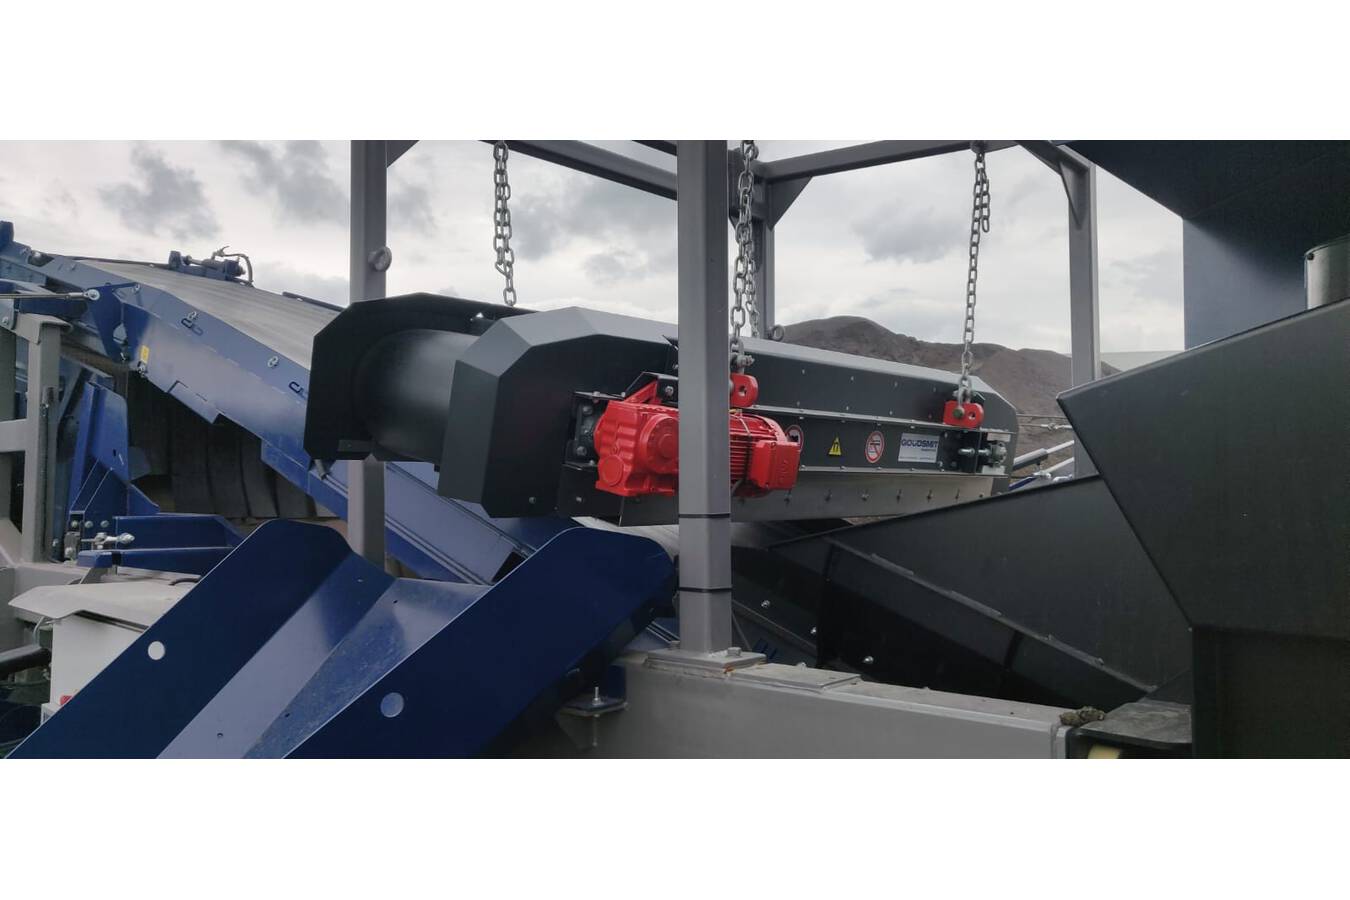 Modular overband magnet for mobile recycling systems Goudsmit  has recently developed a range of mobile overband magnets. The modularly designed magnets remove iron particles from underlying material streams and are intended for mobile recycling systems.